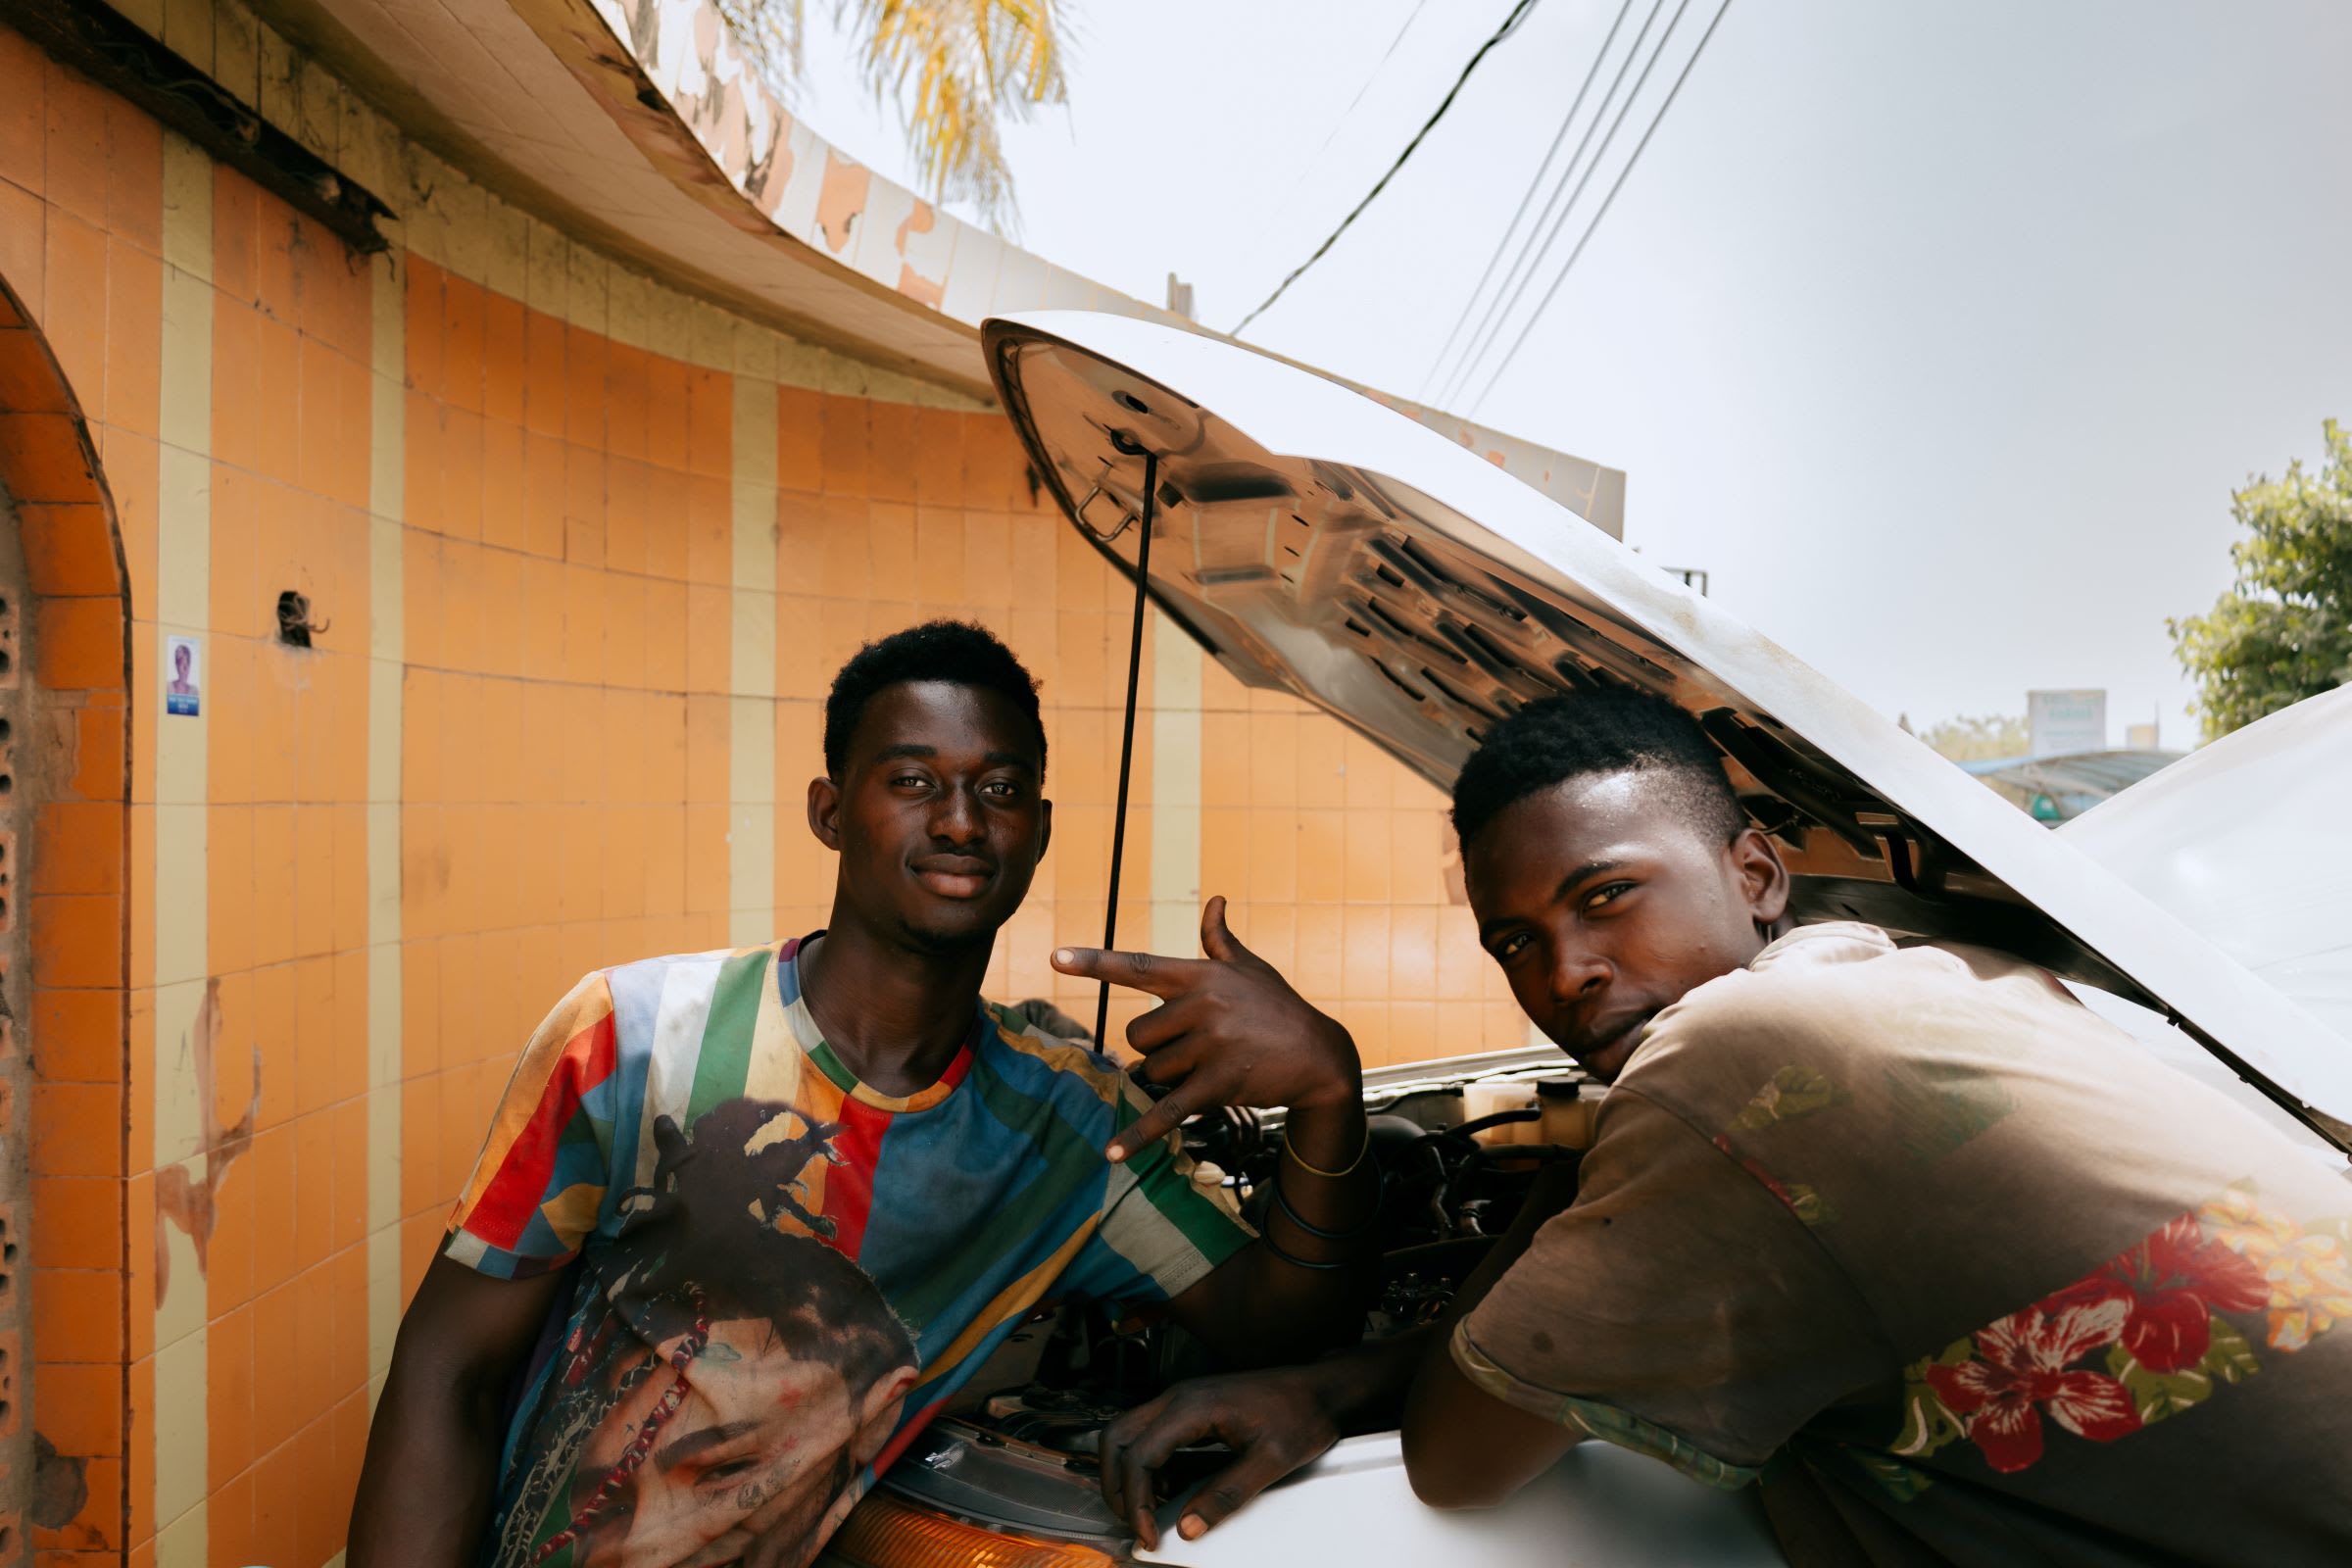 Two young men in Accra. Photography by Rachel Seidu for Art Basel.